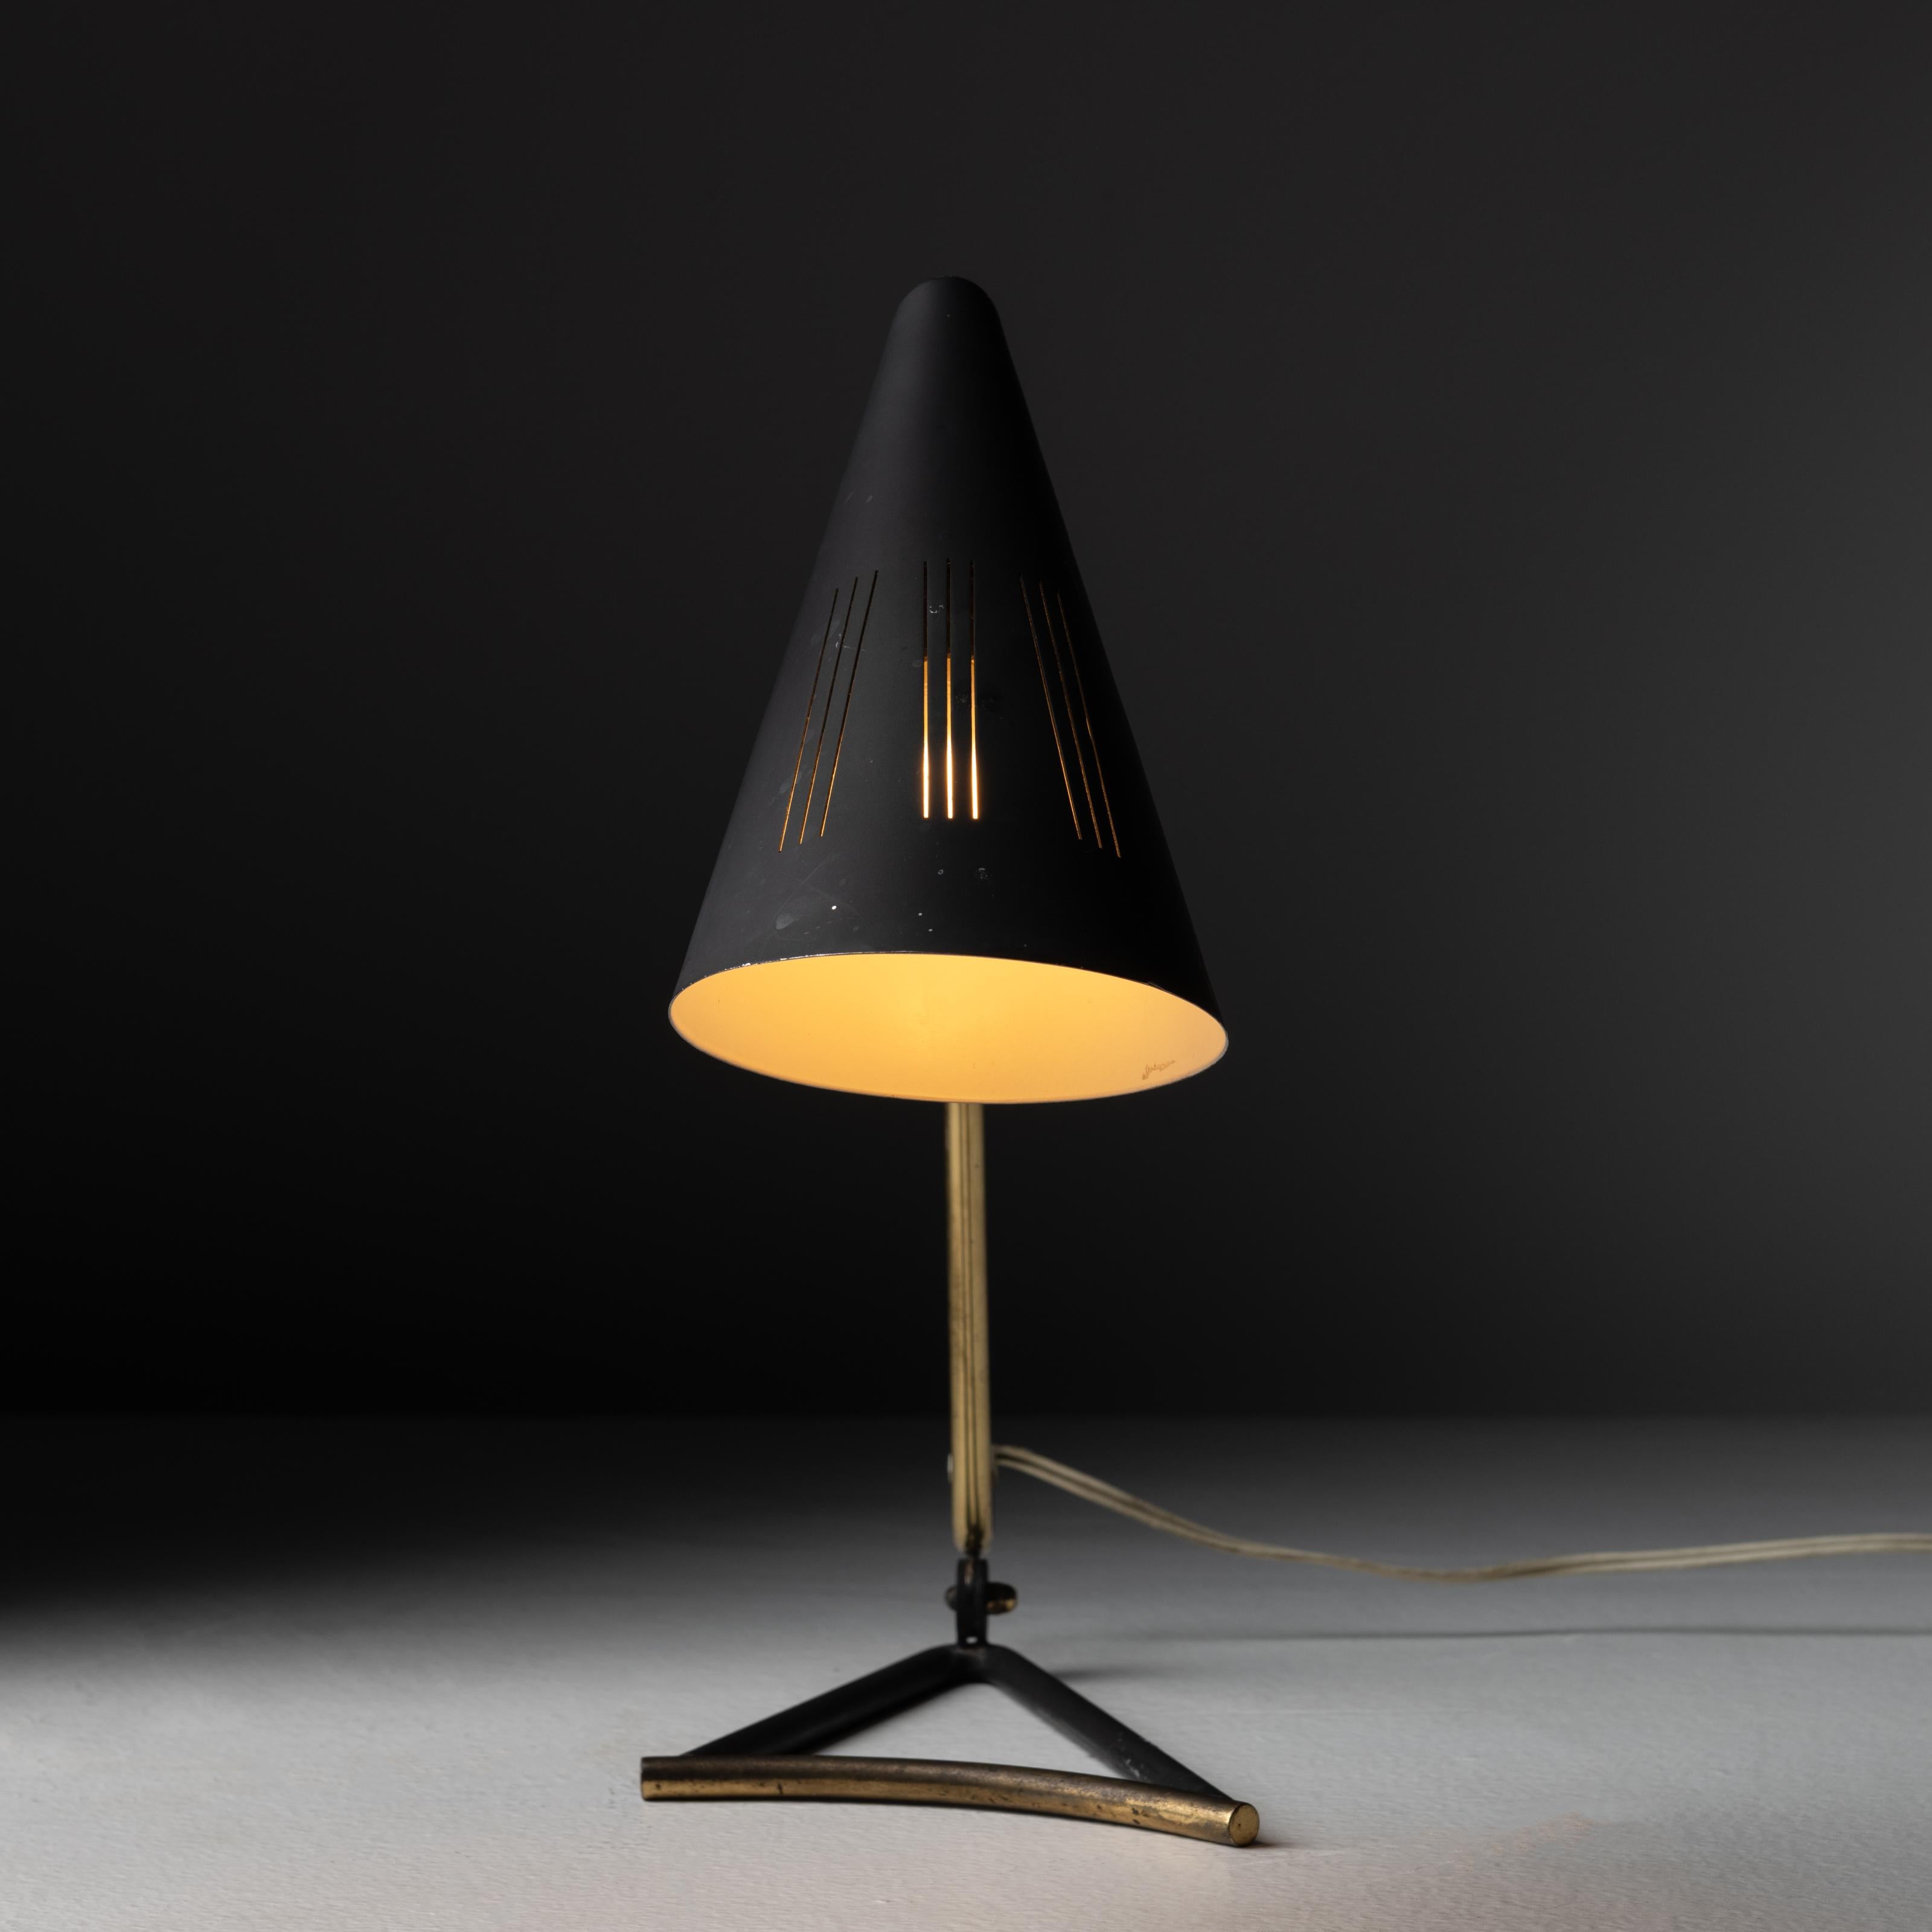 Table lamp by Svend Aage Holm Sørensen. Designed and manufactured in Denmark, circa 1950. Elegant and minimal curved brass table lamp with black enameled shade, with three parallel line die-cuts for additional light diffusion. This lamp hold one E14